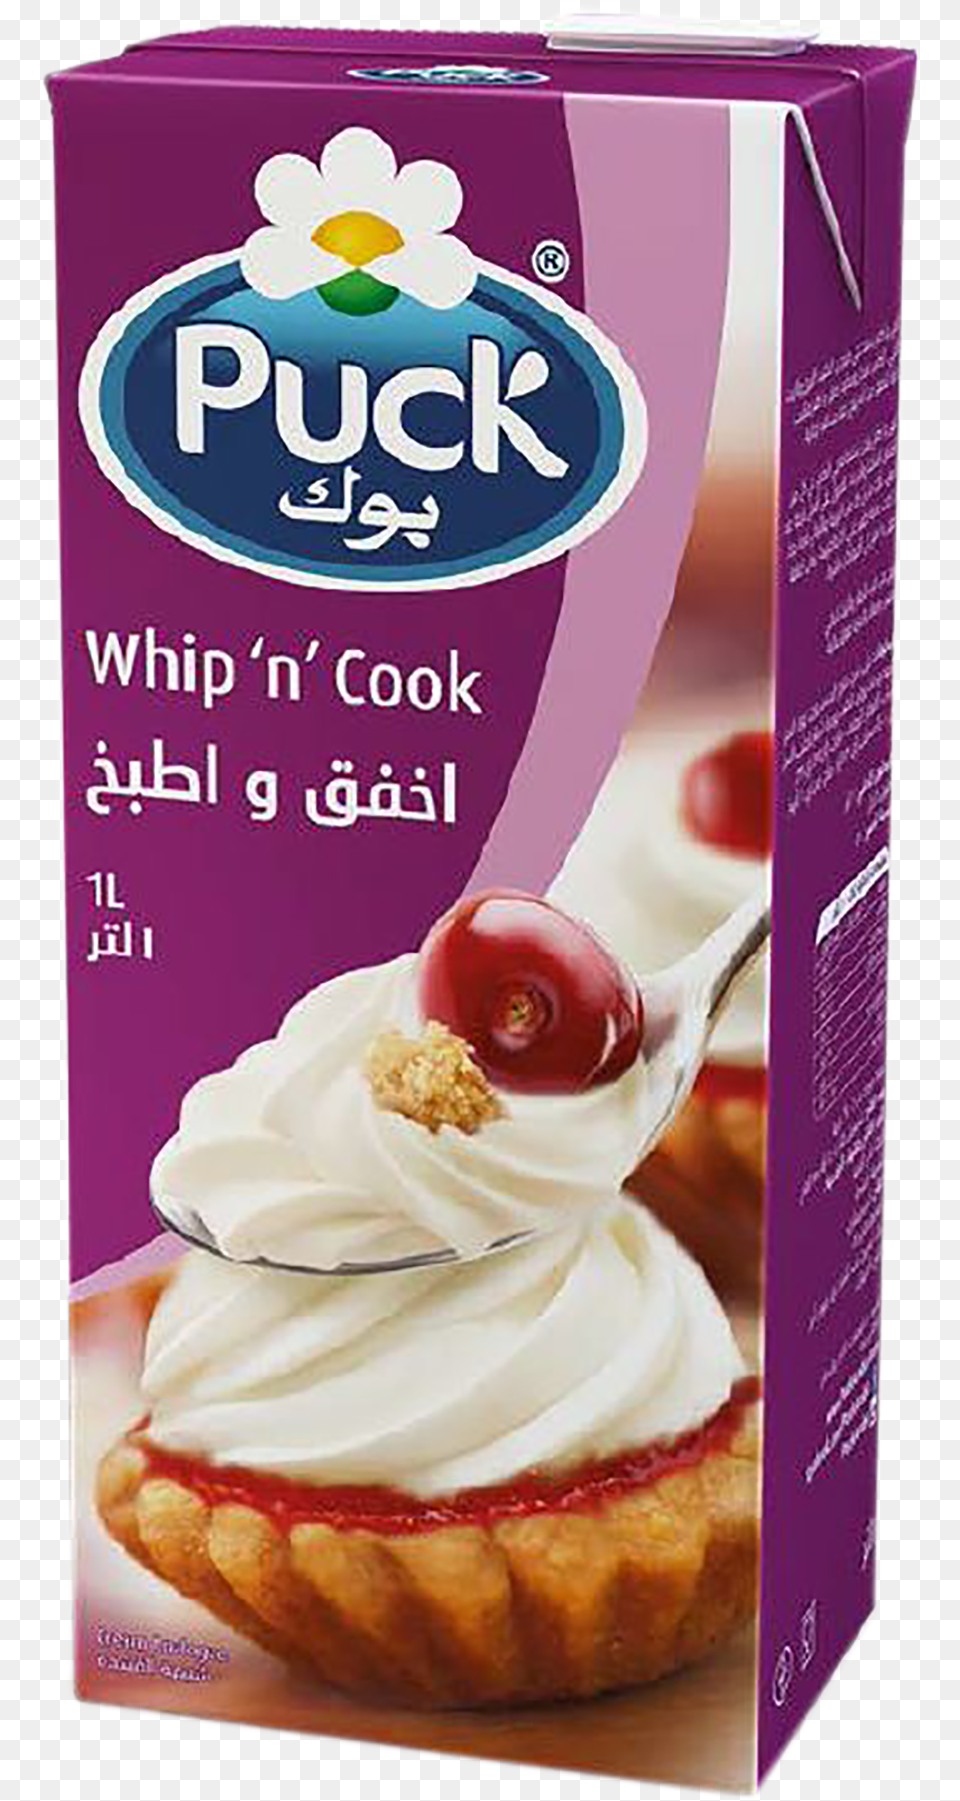 Whip Amp Cook Cream, Dessert, Food, Whipped Cream, Cake Png Image